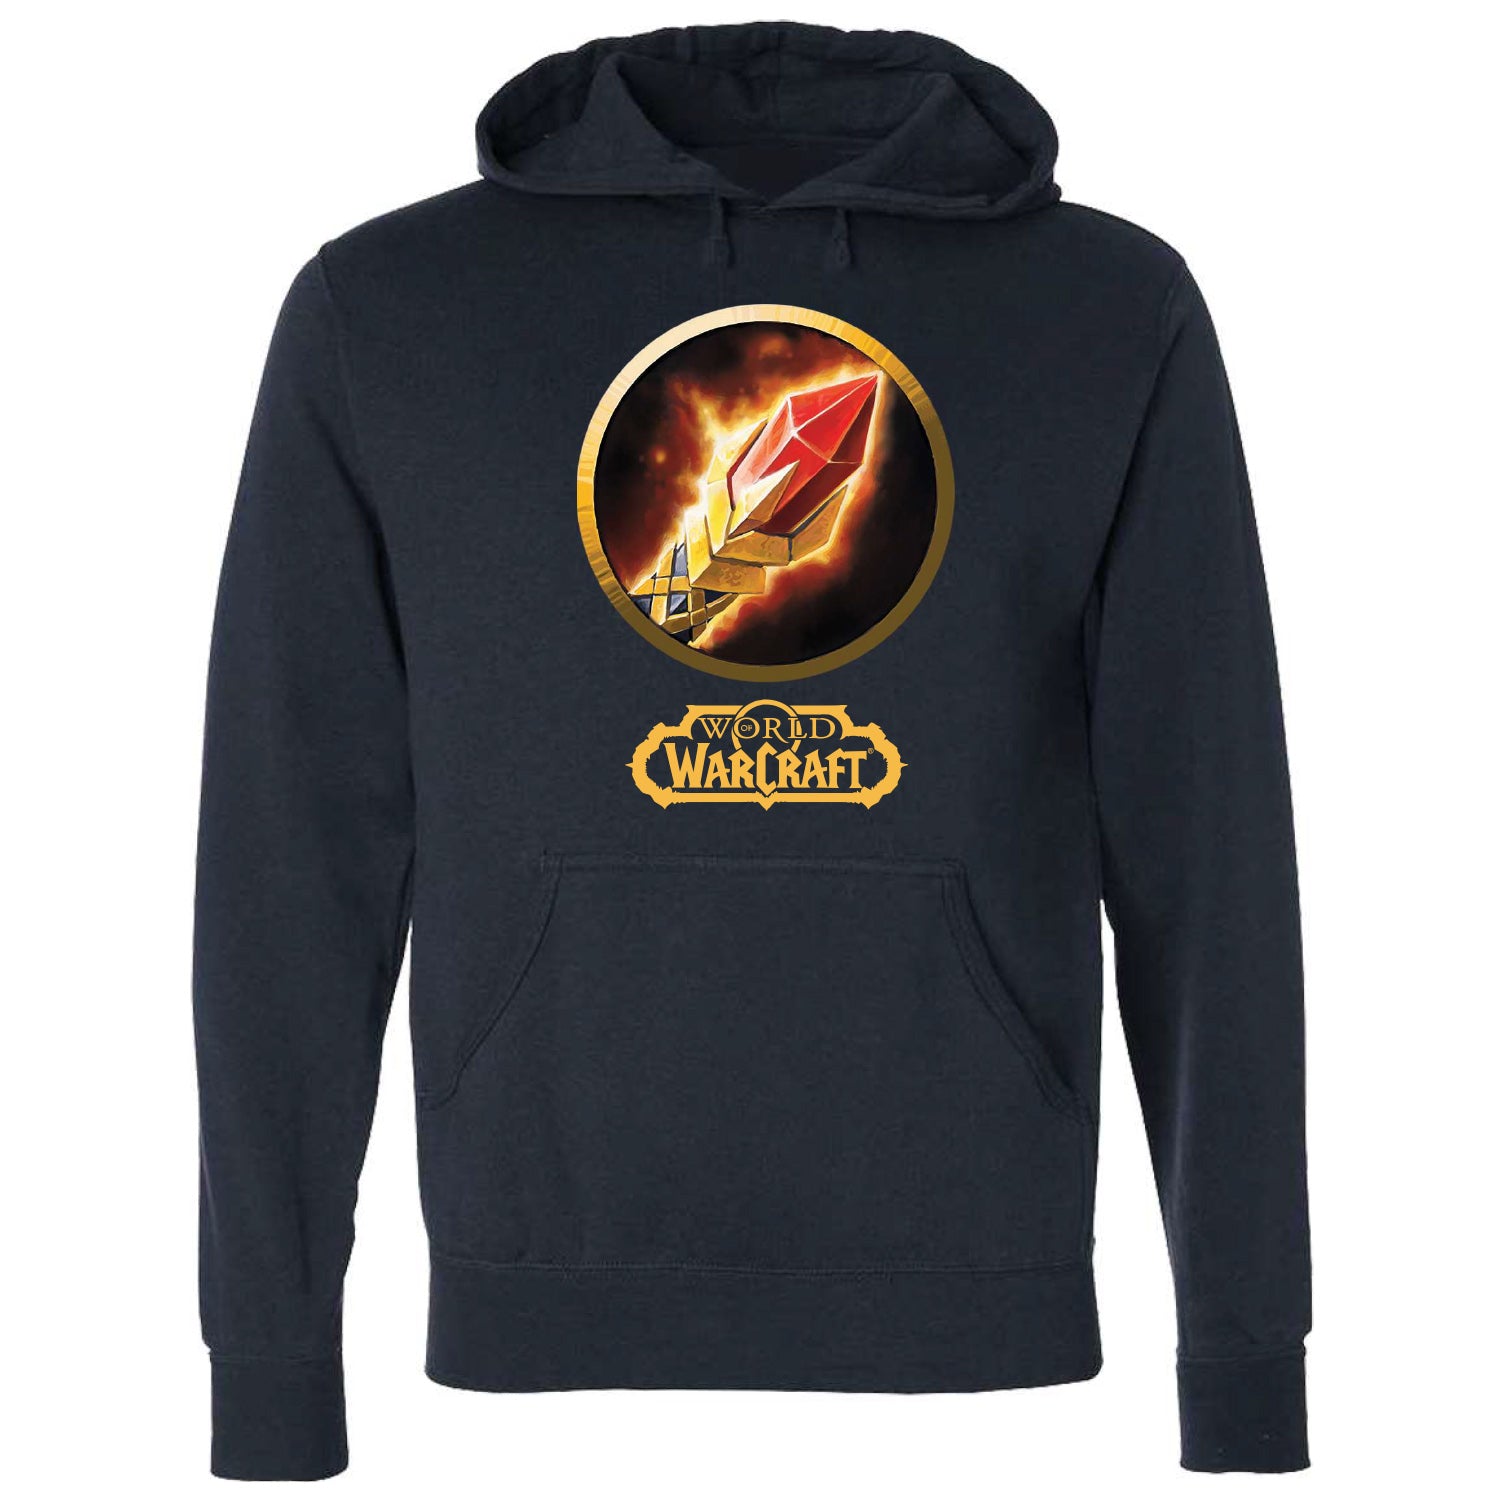 World of Warcraft Mage Hoodie - Front View Navy Version